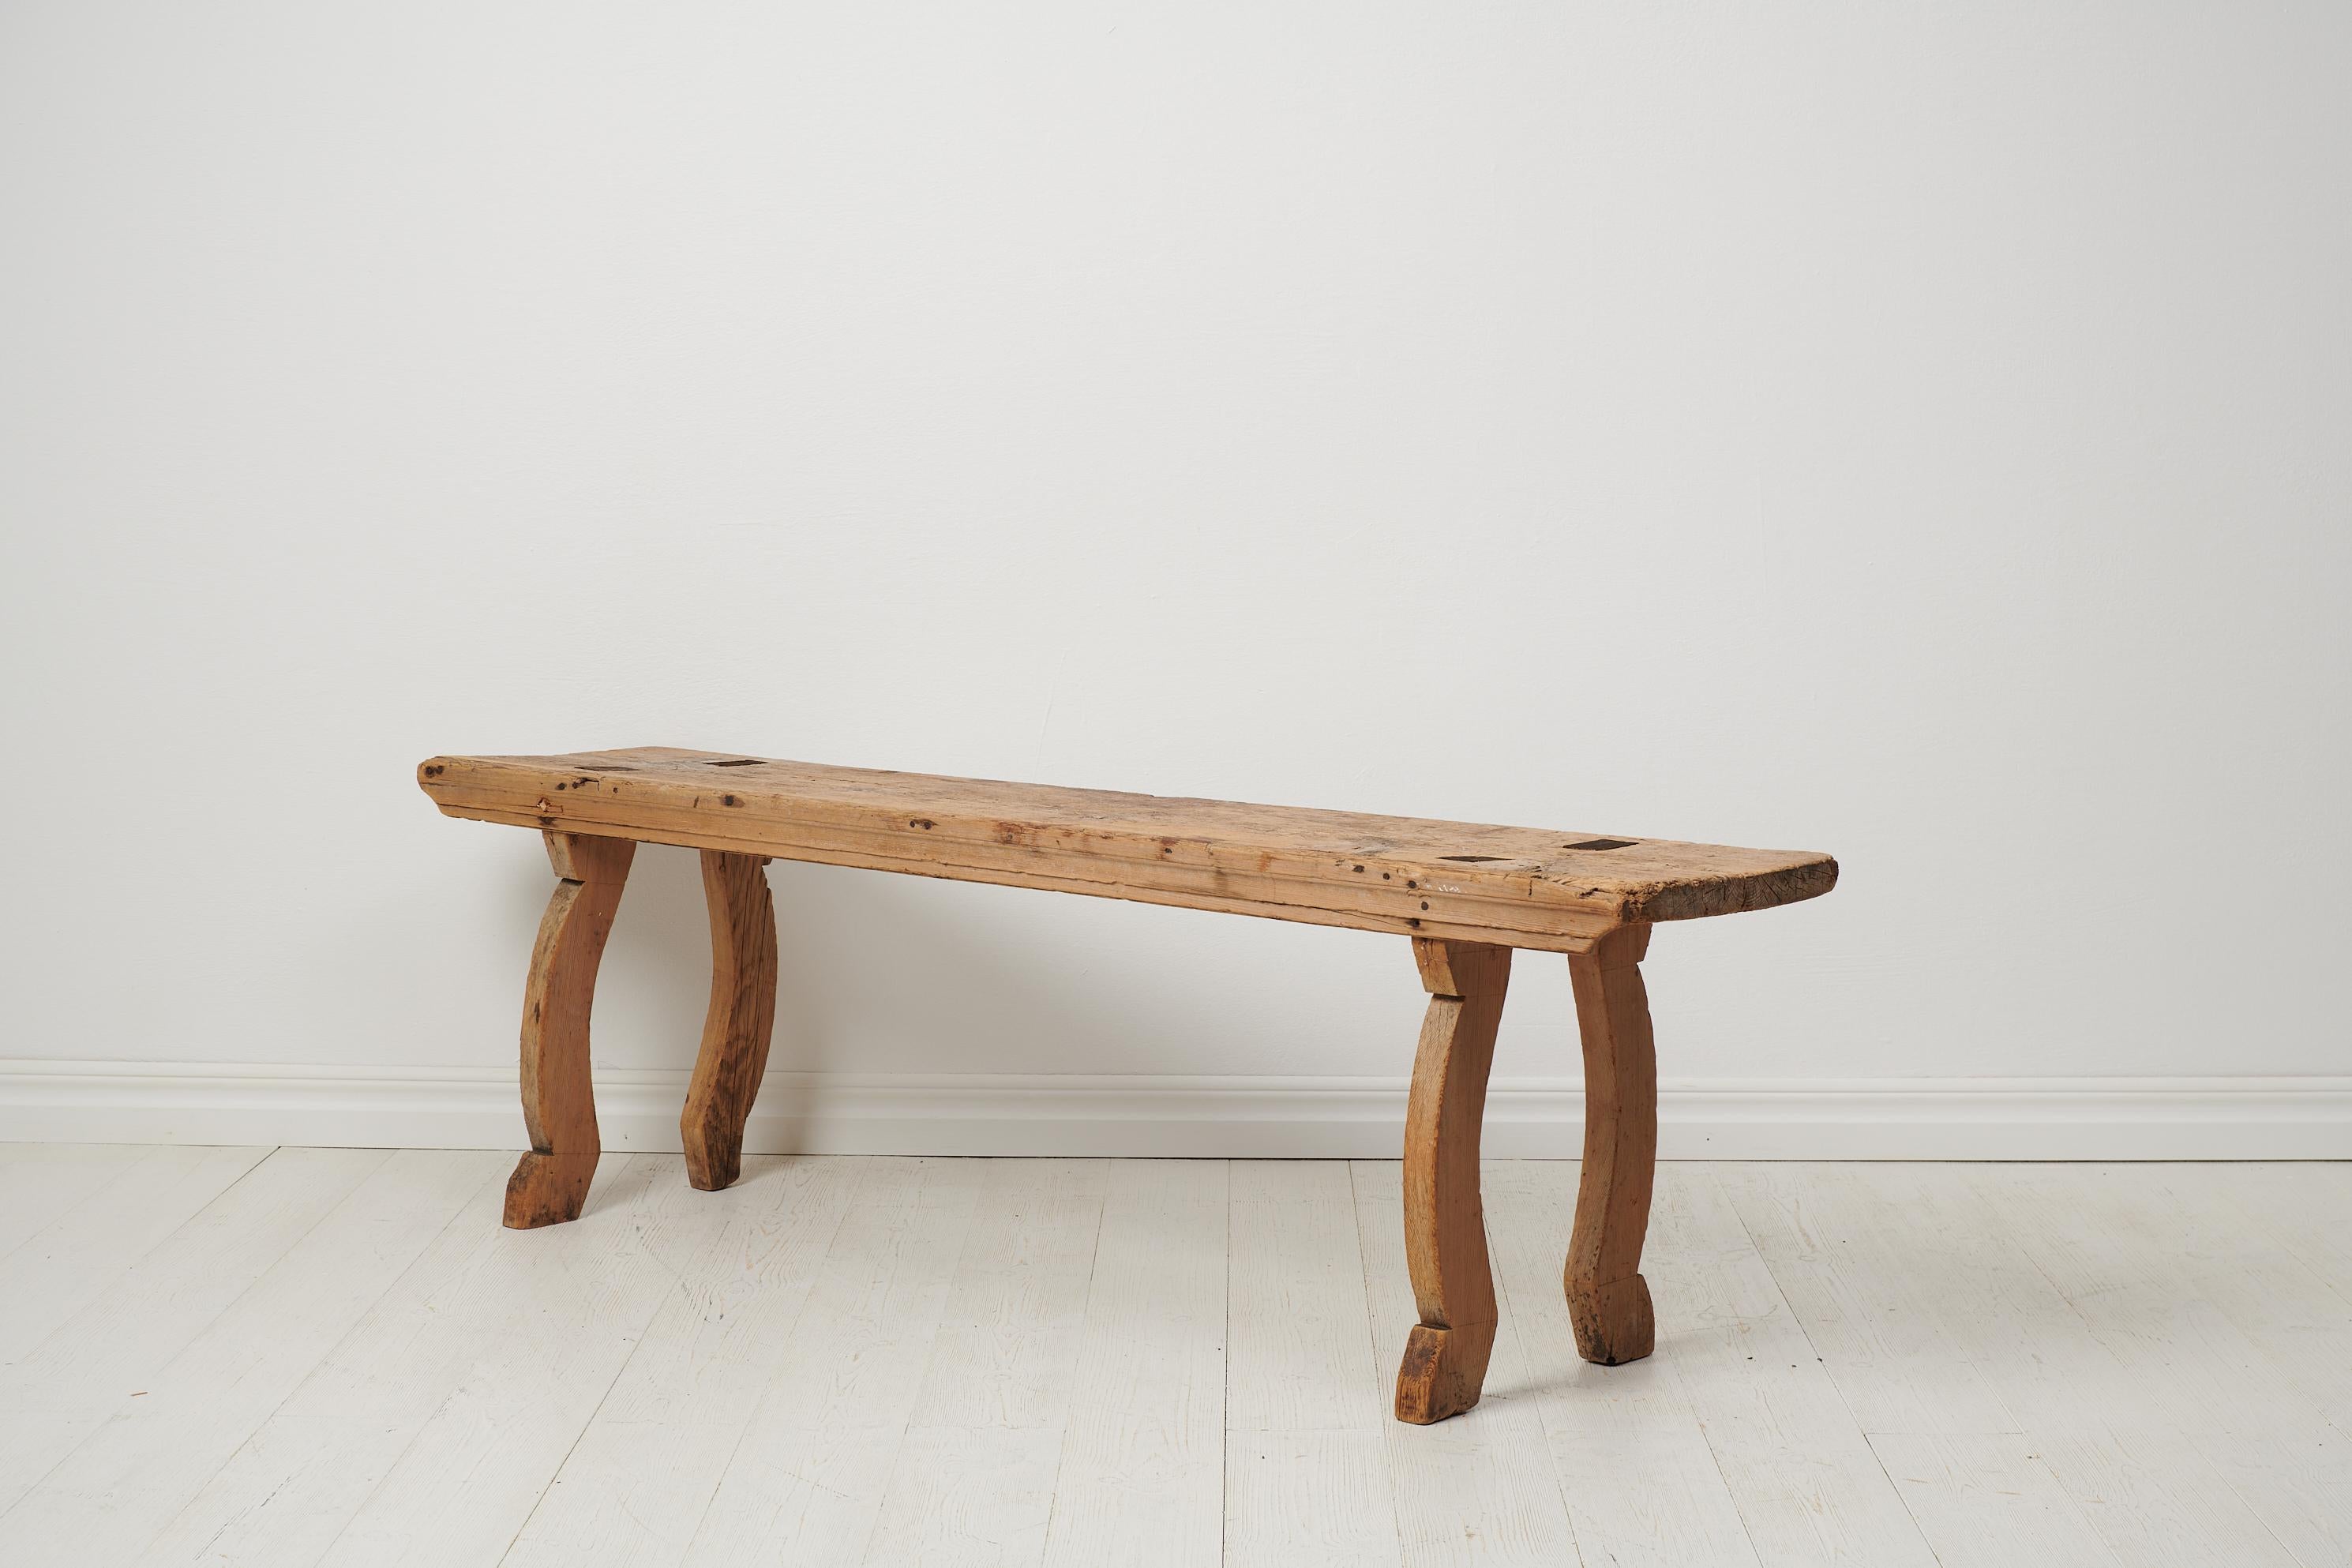 Antique Swedish Rustic Solid Pine Bench In Good Condition For Sale In Kramfors, SE